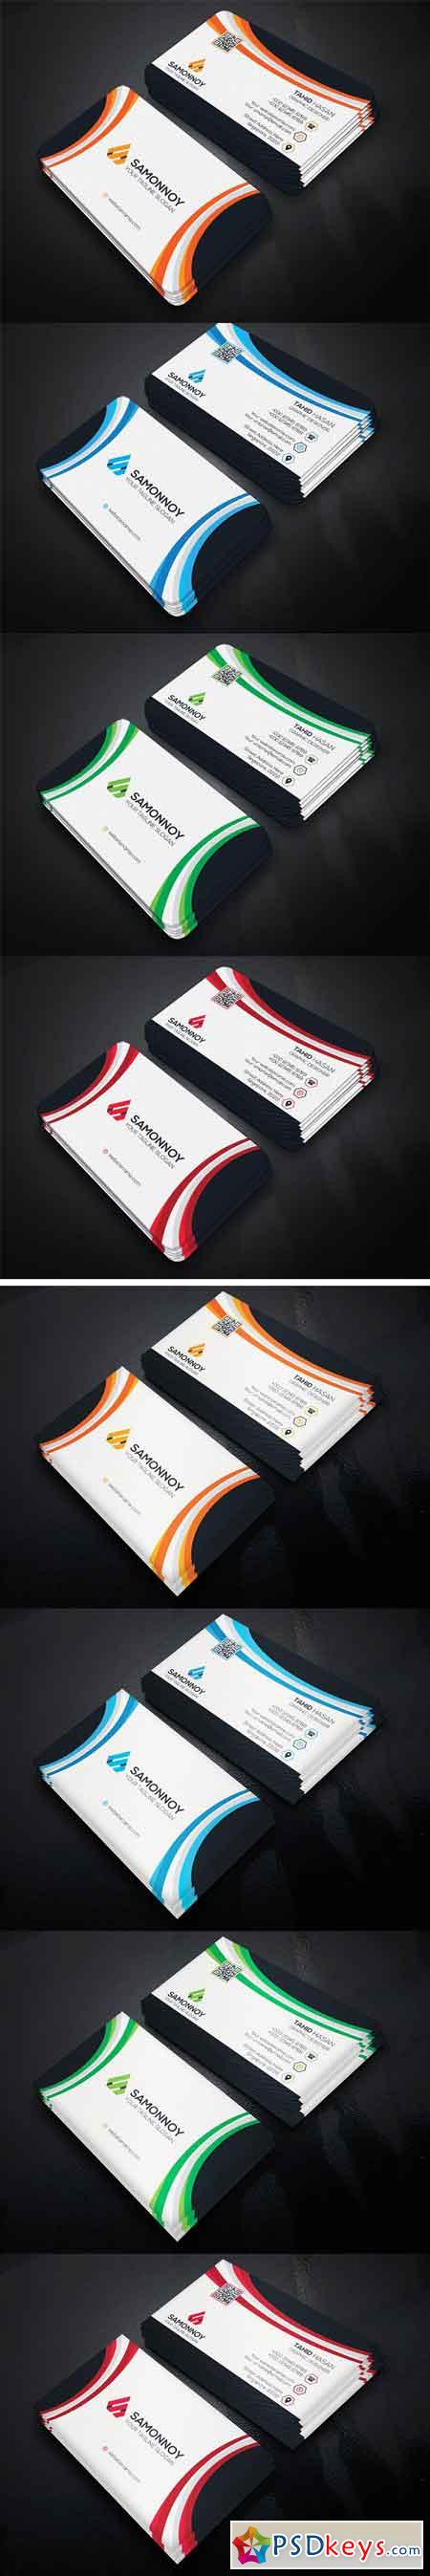 Business Cards 2372795